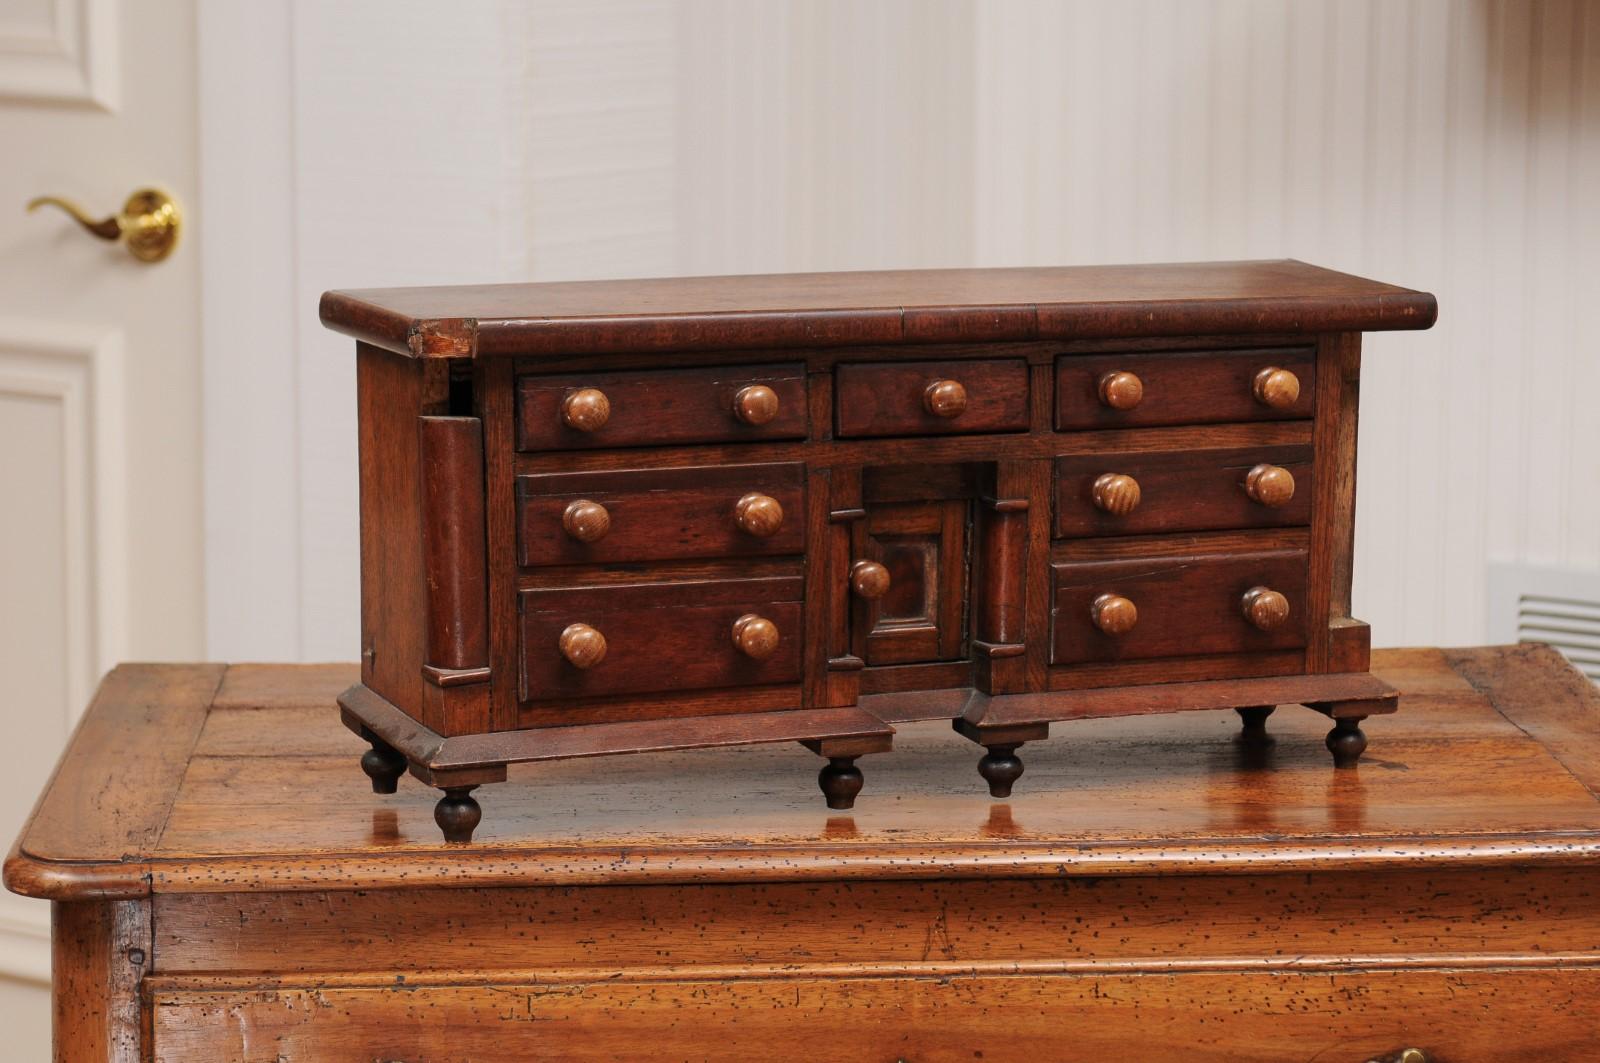 An English miniature chest from the late 19th century, with seven drawers, semi columns and turnip feet. Created in England during the last decade of the 19th century, this miniature piece, likely a salesman sample due to its petite proportions,